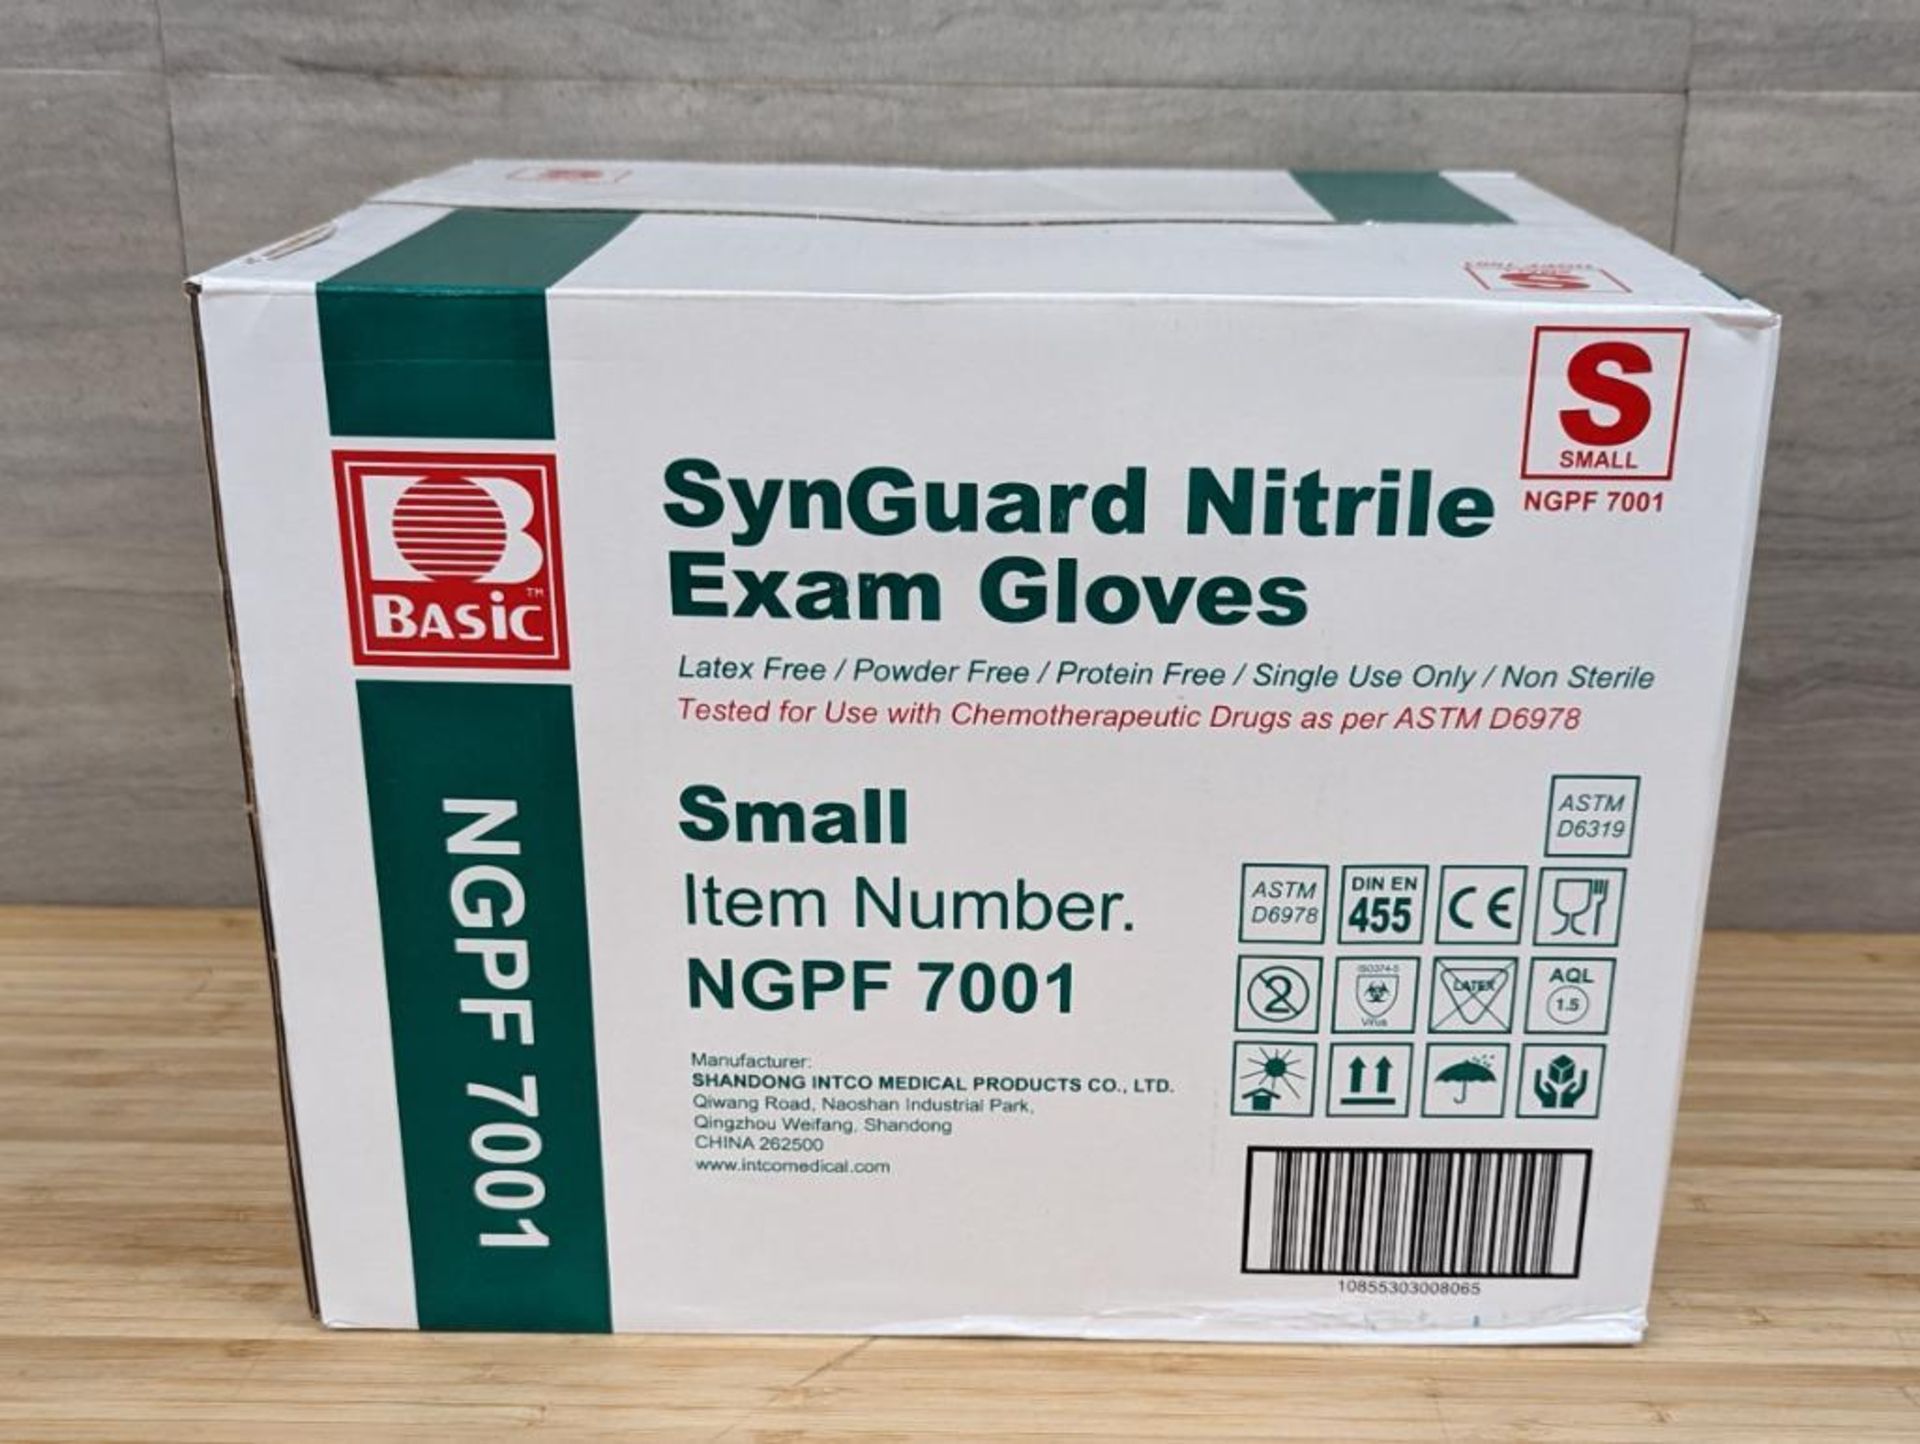 SYNGUARD NITRILE POWDER FREE BLUE EXAM GLOVES, SIZE SMALL - LOT OF 1000 - Image 2 of 5